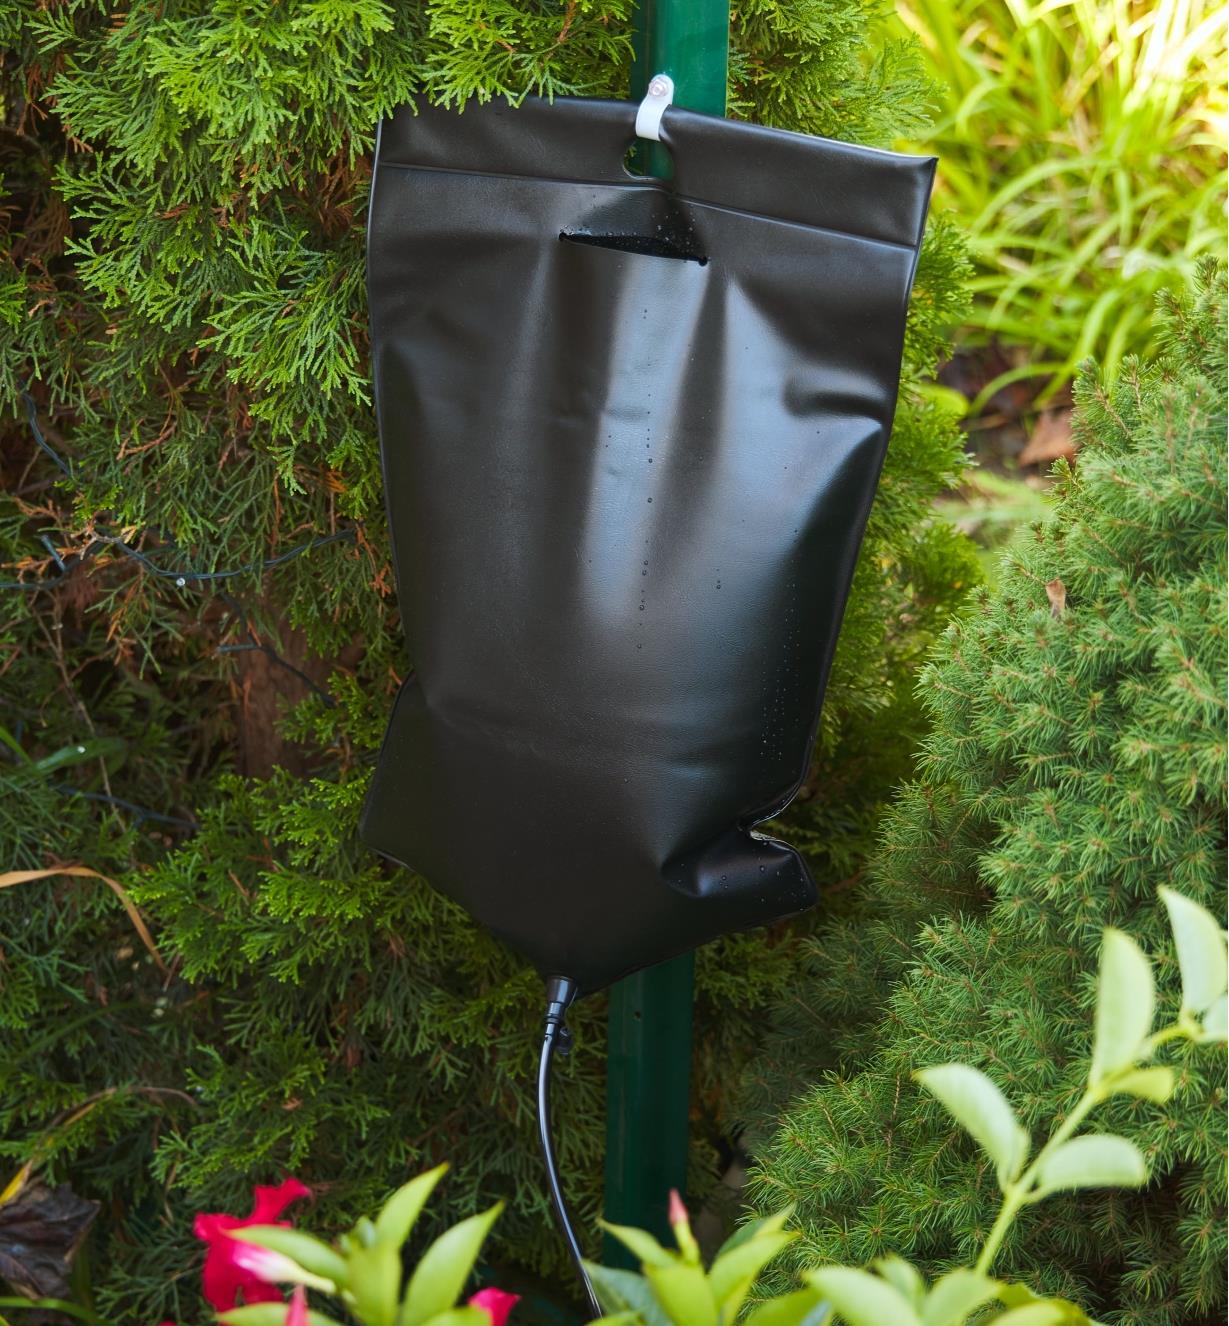 The water bag from the drip irrigation kit hanging on a post